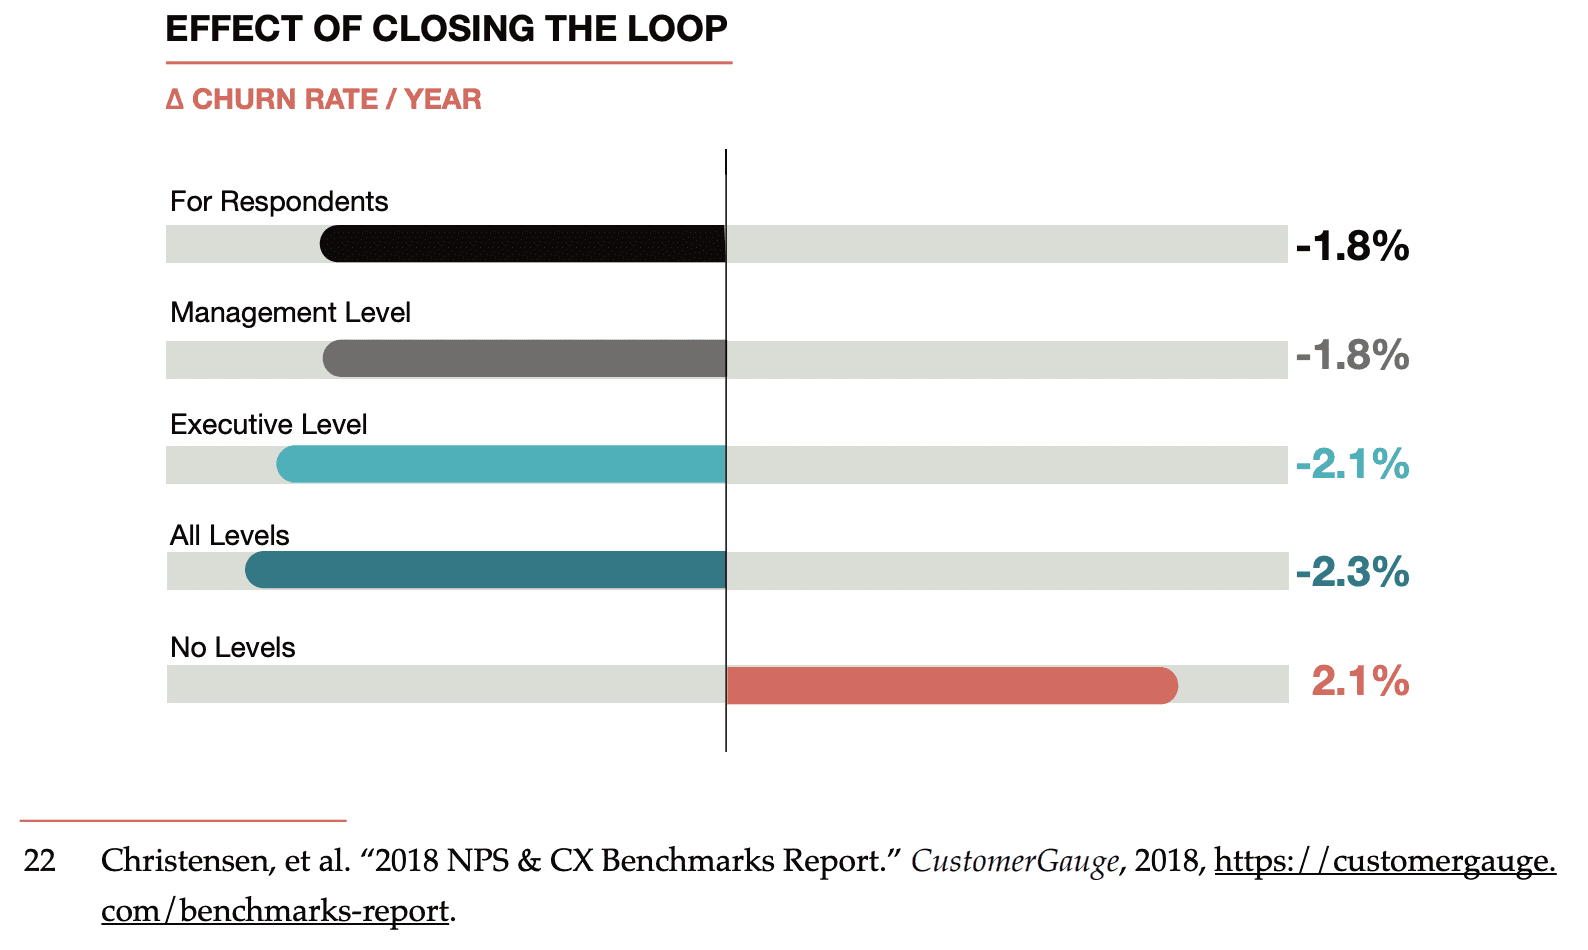 Closing the loop important to stop churn